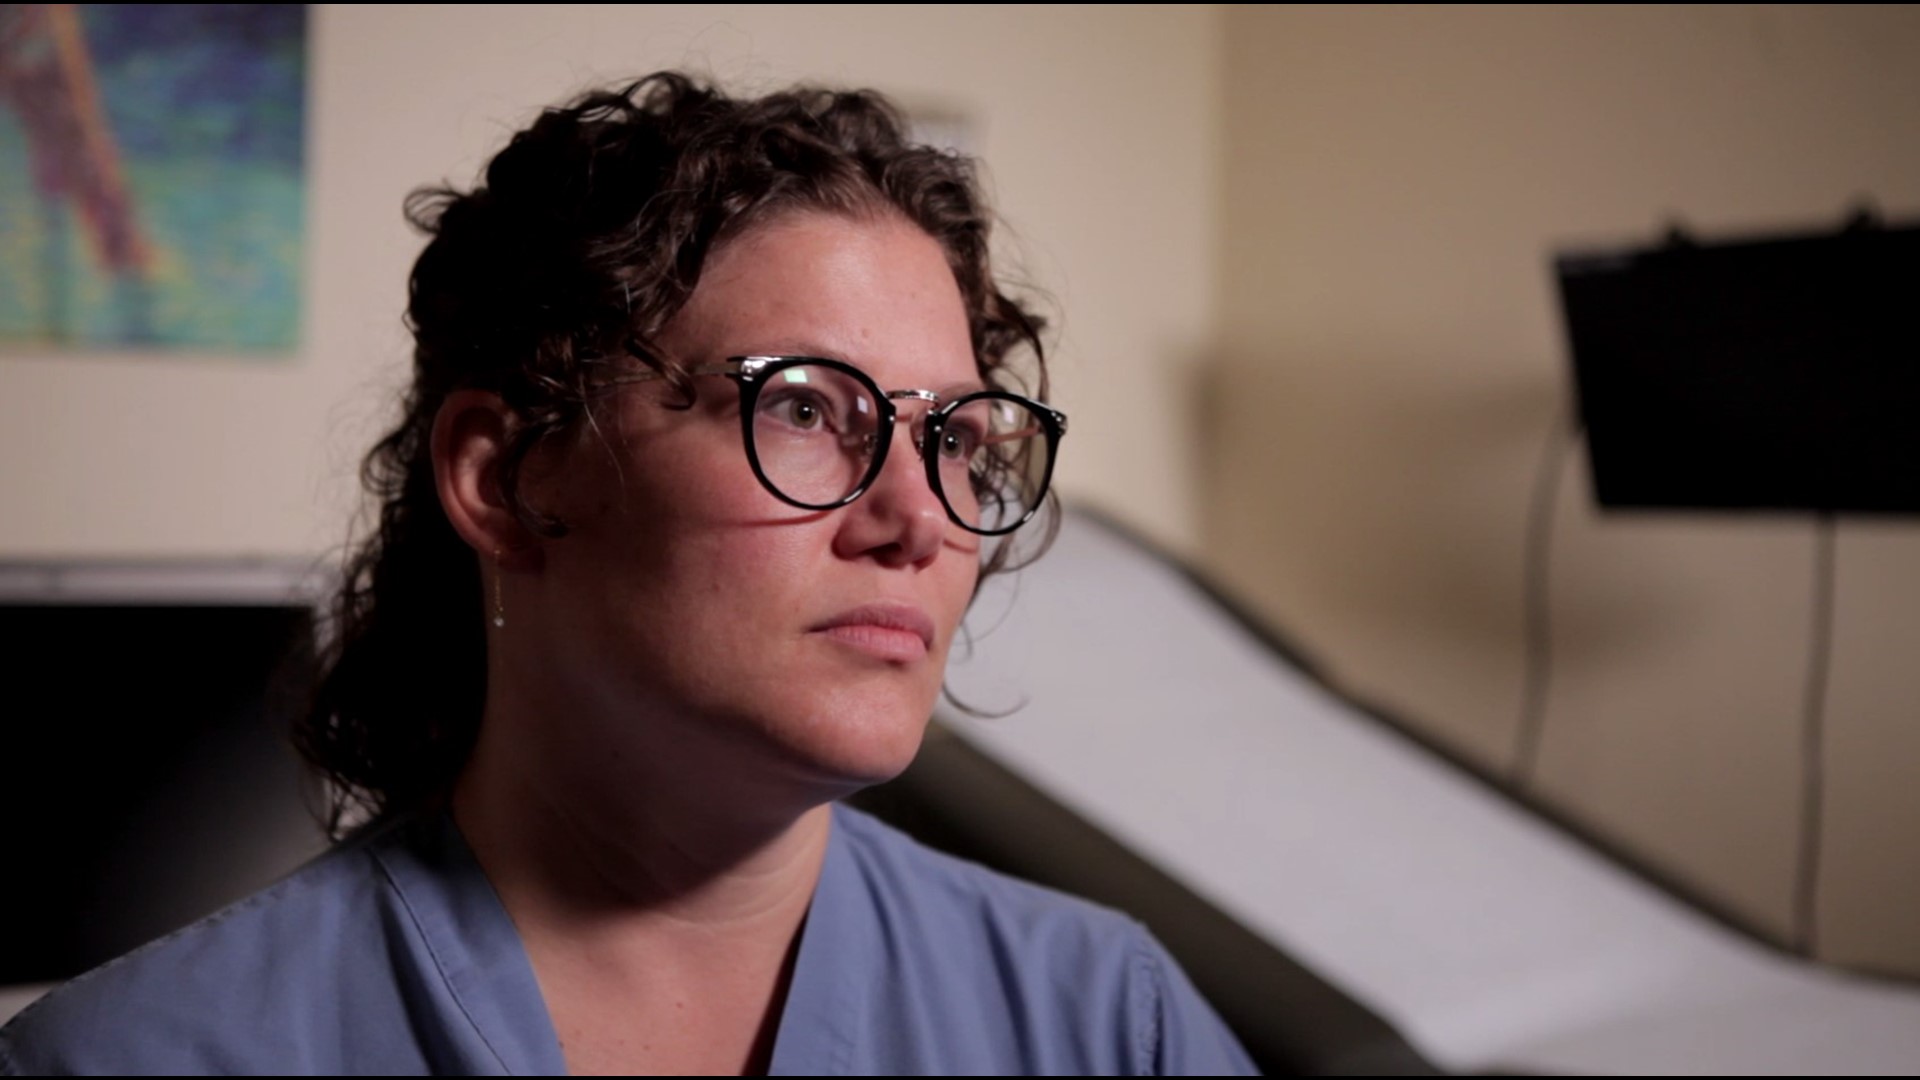 Most abortions are now illegal in Indiana. But Dr. Katie McHugh says the demand has skyrocketed in recent months, so she will move her practice to meet the need.